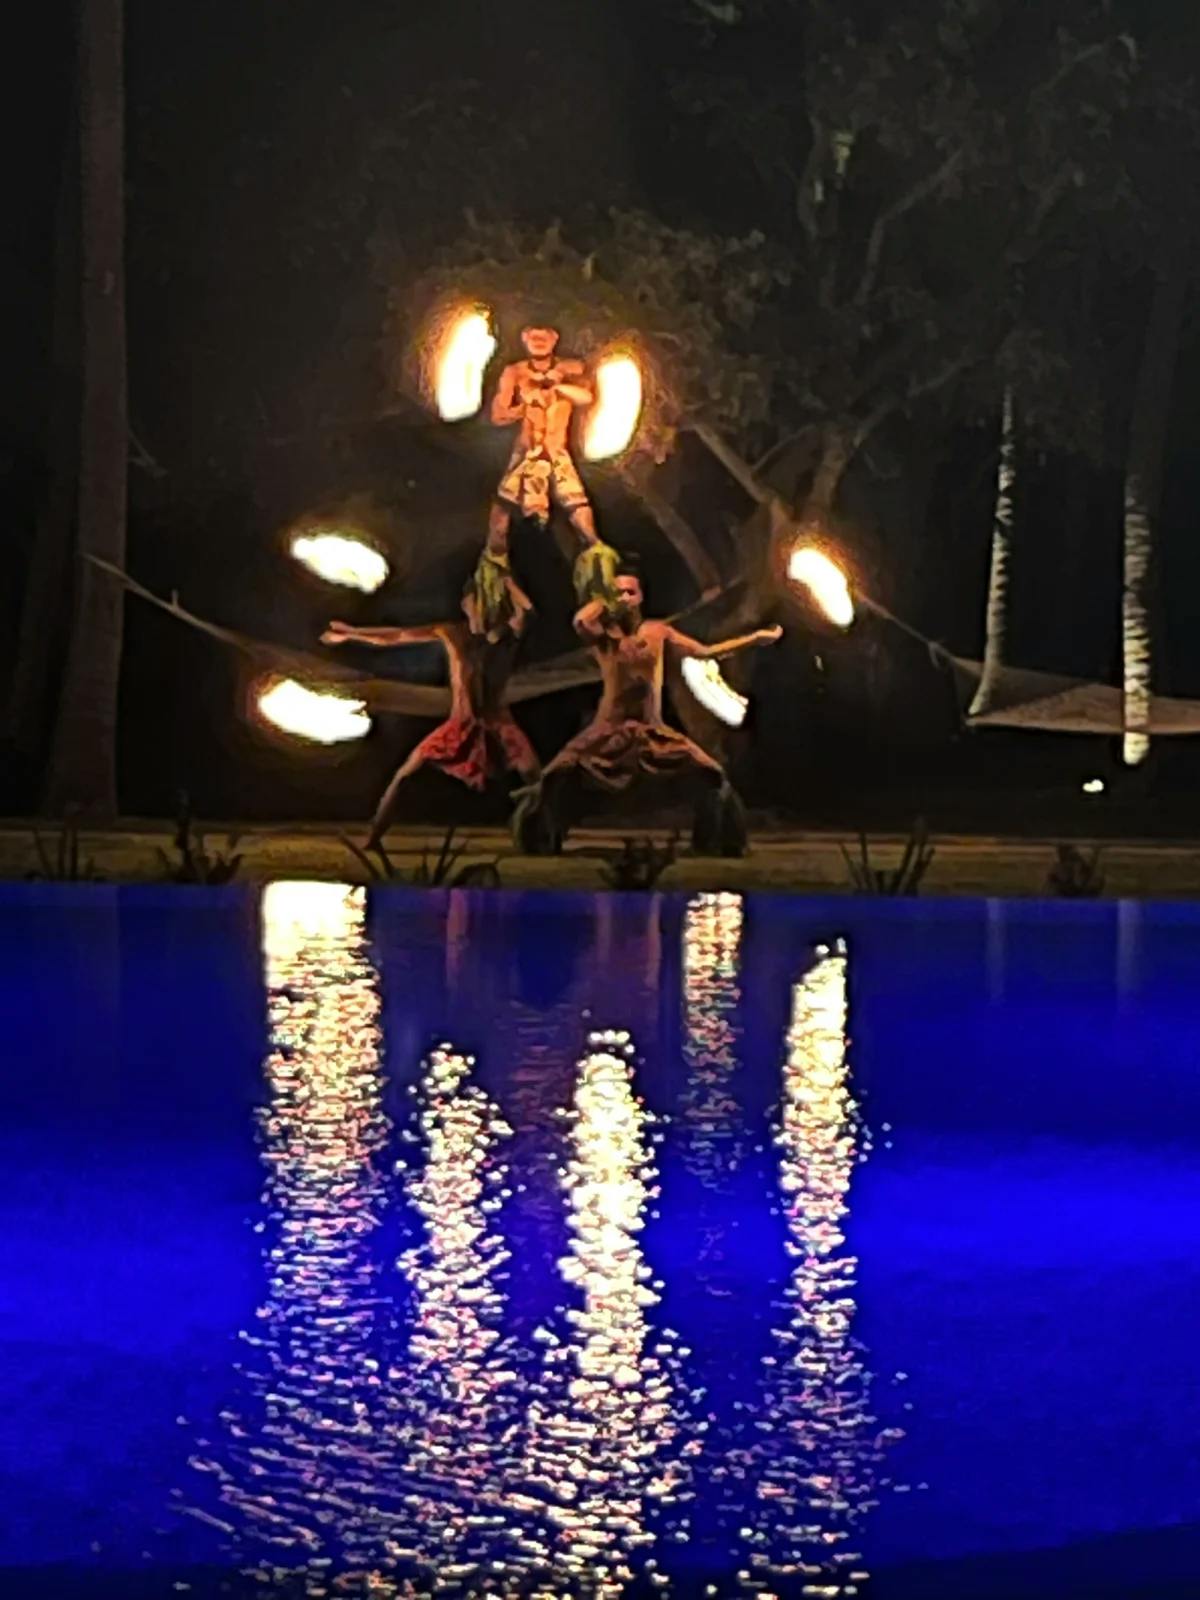 Three men in sarongs standing in a human pyramid holding flaming torches next to the pool, during the weekly fire dance dinner show